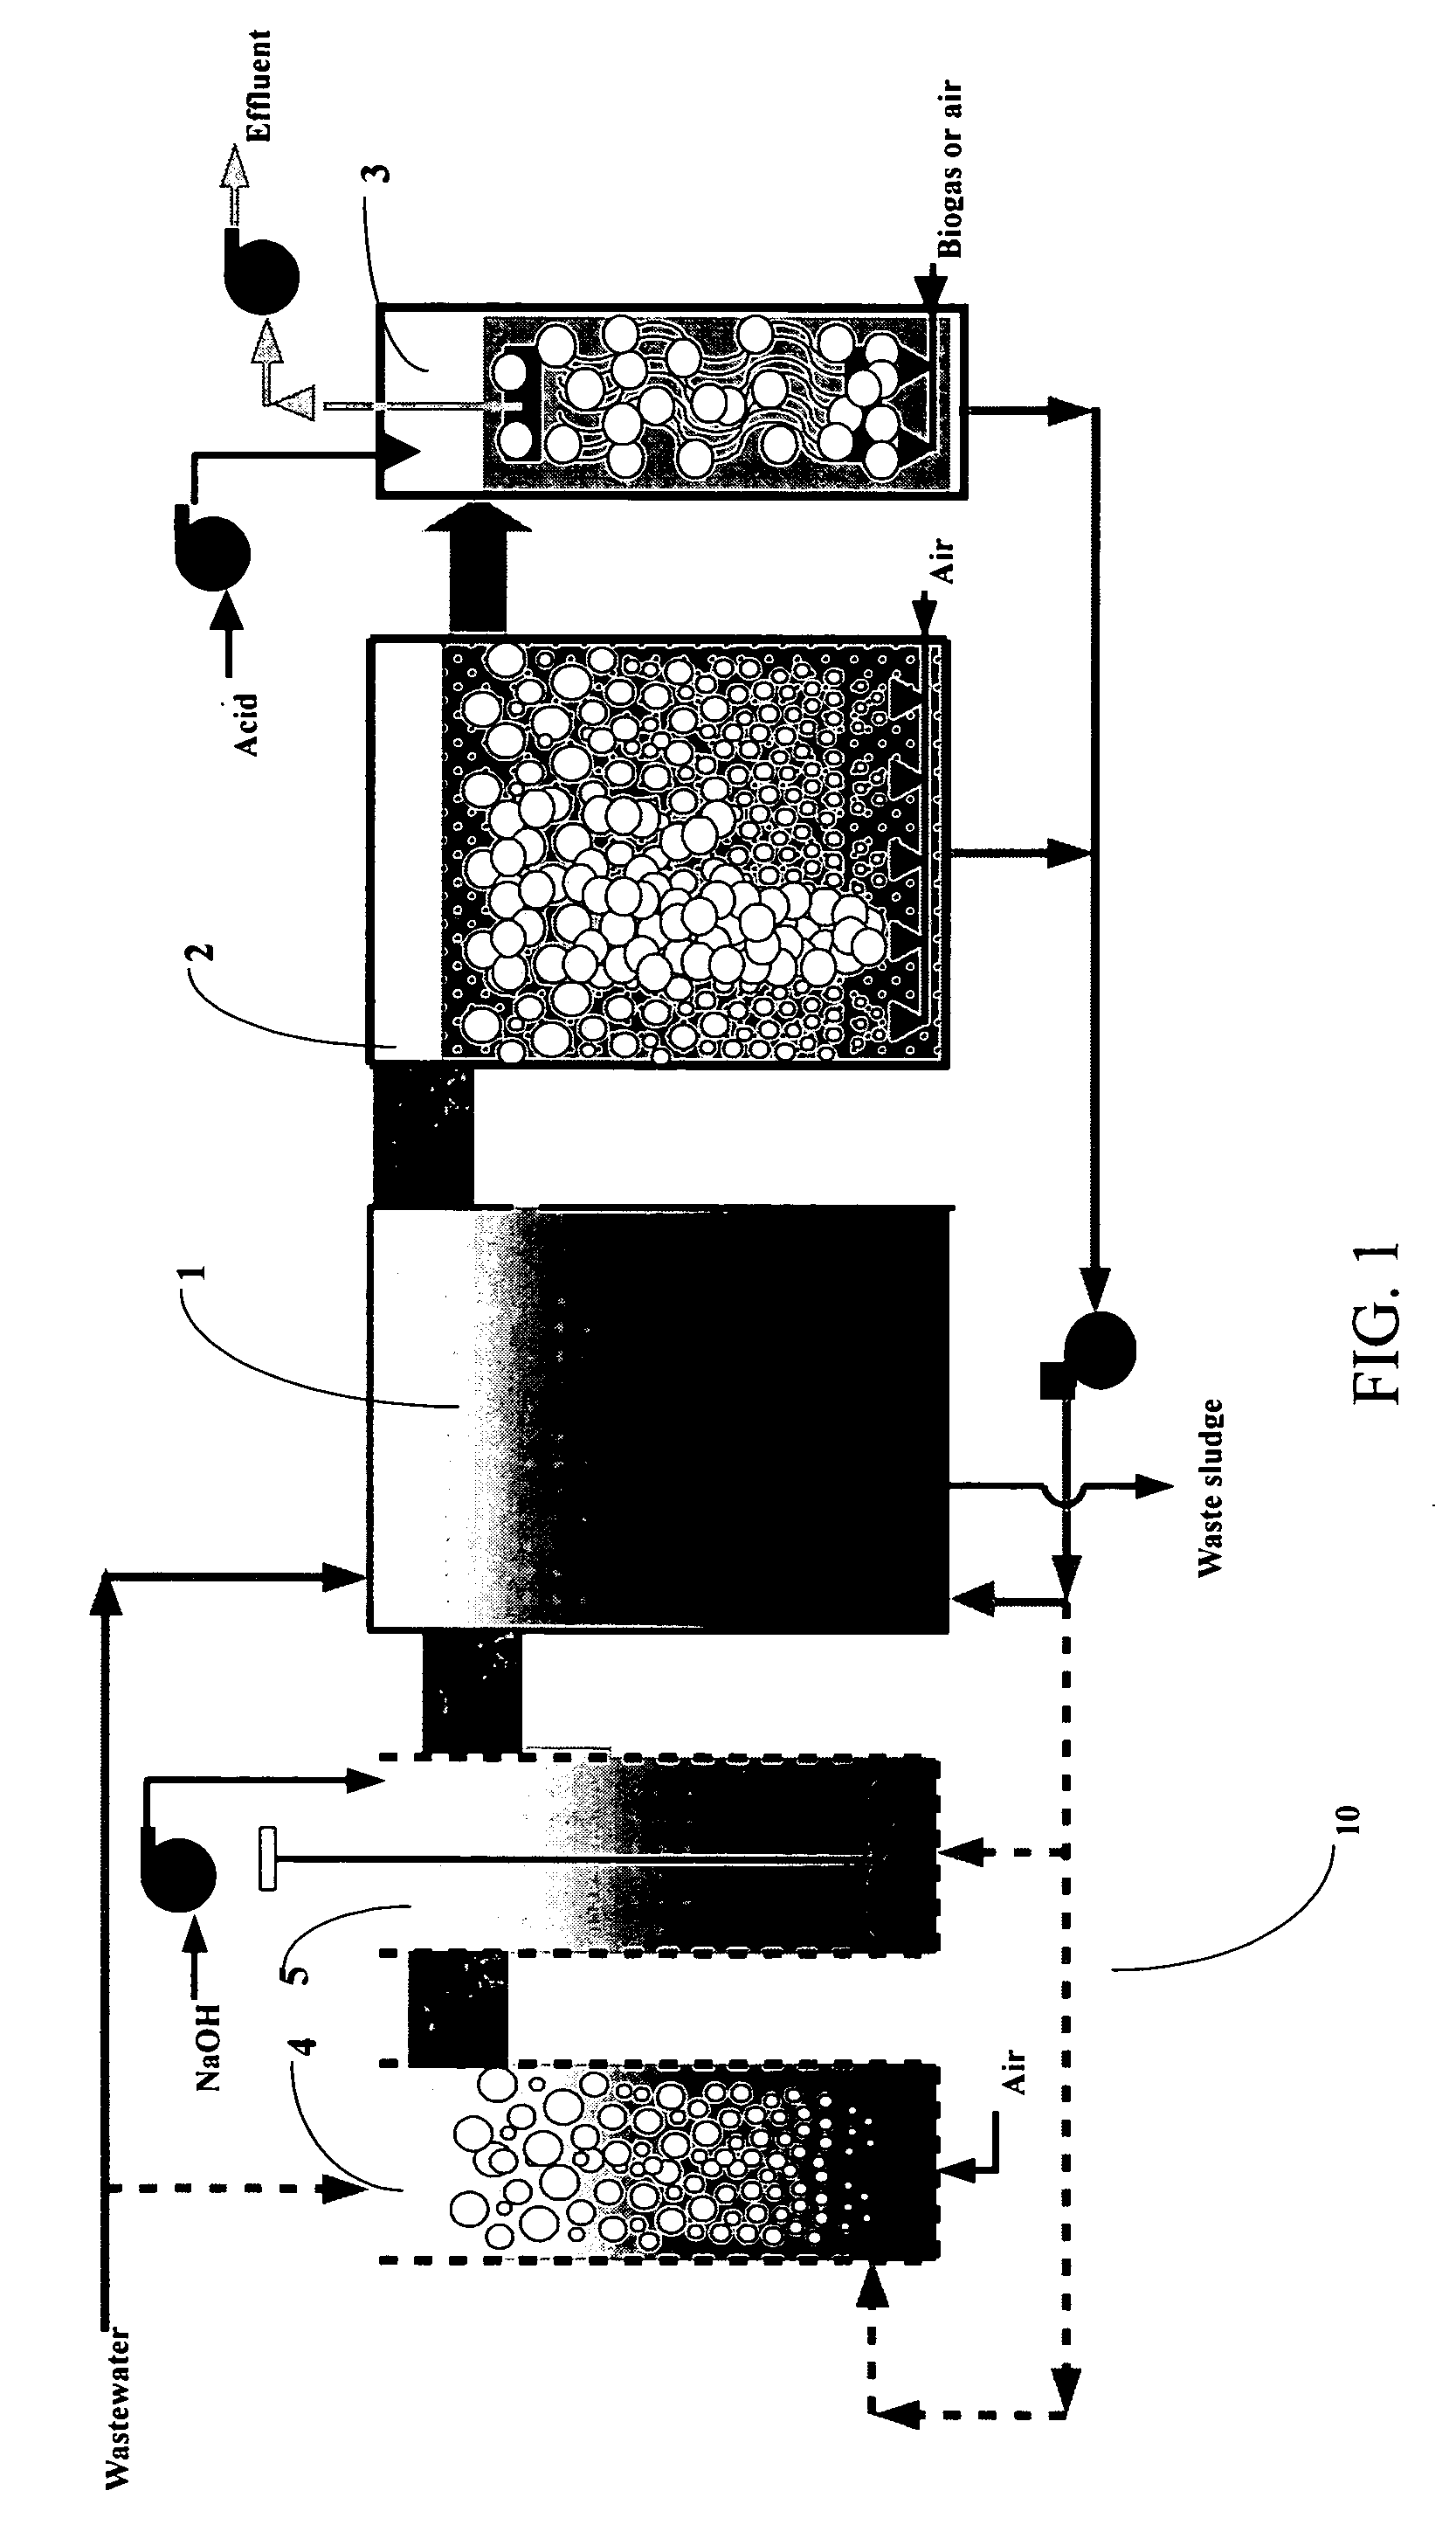 Method and system for treating wastewater containing organic compounds